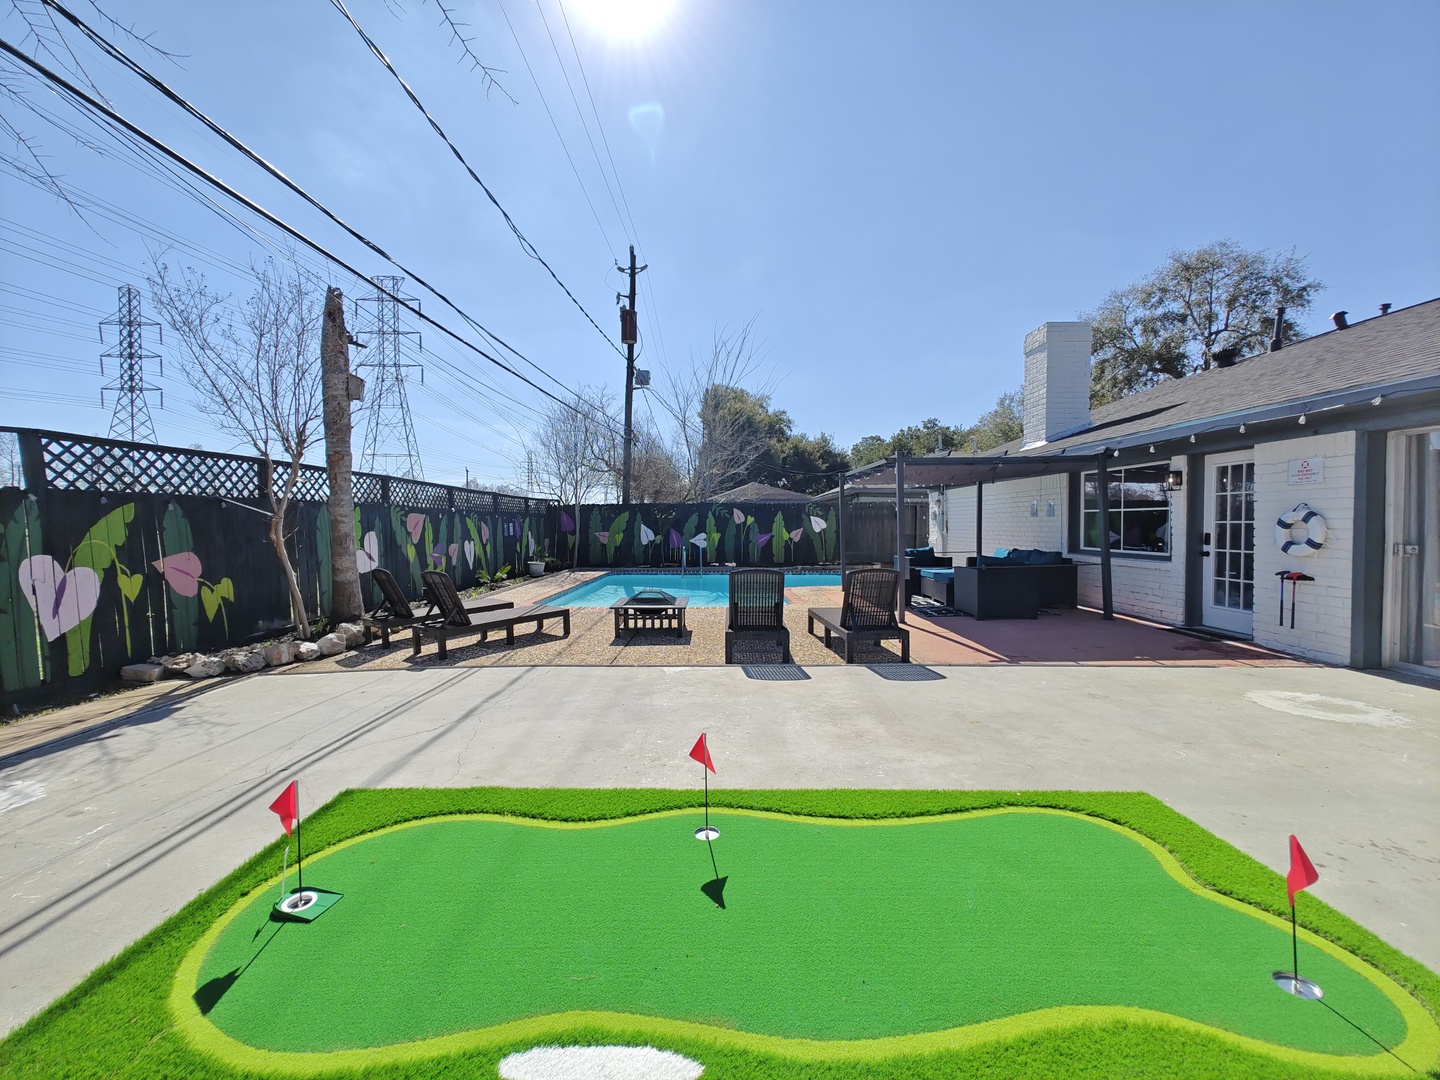 Practice your putt out back or make a splash in the sparkling pool!